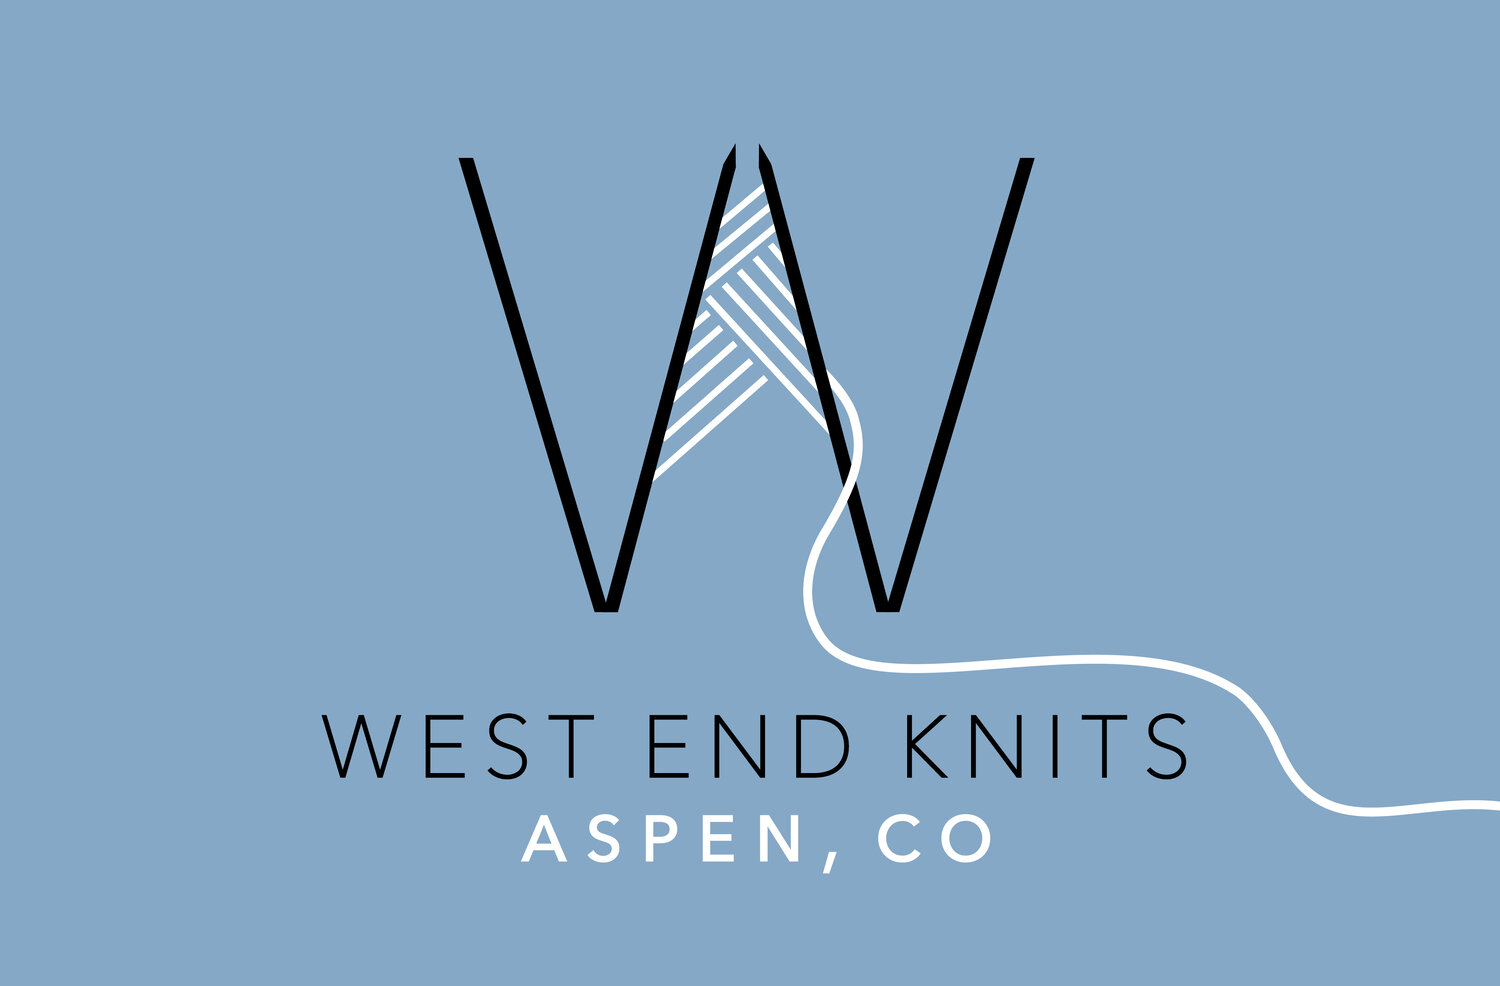 West End Knits